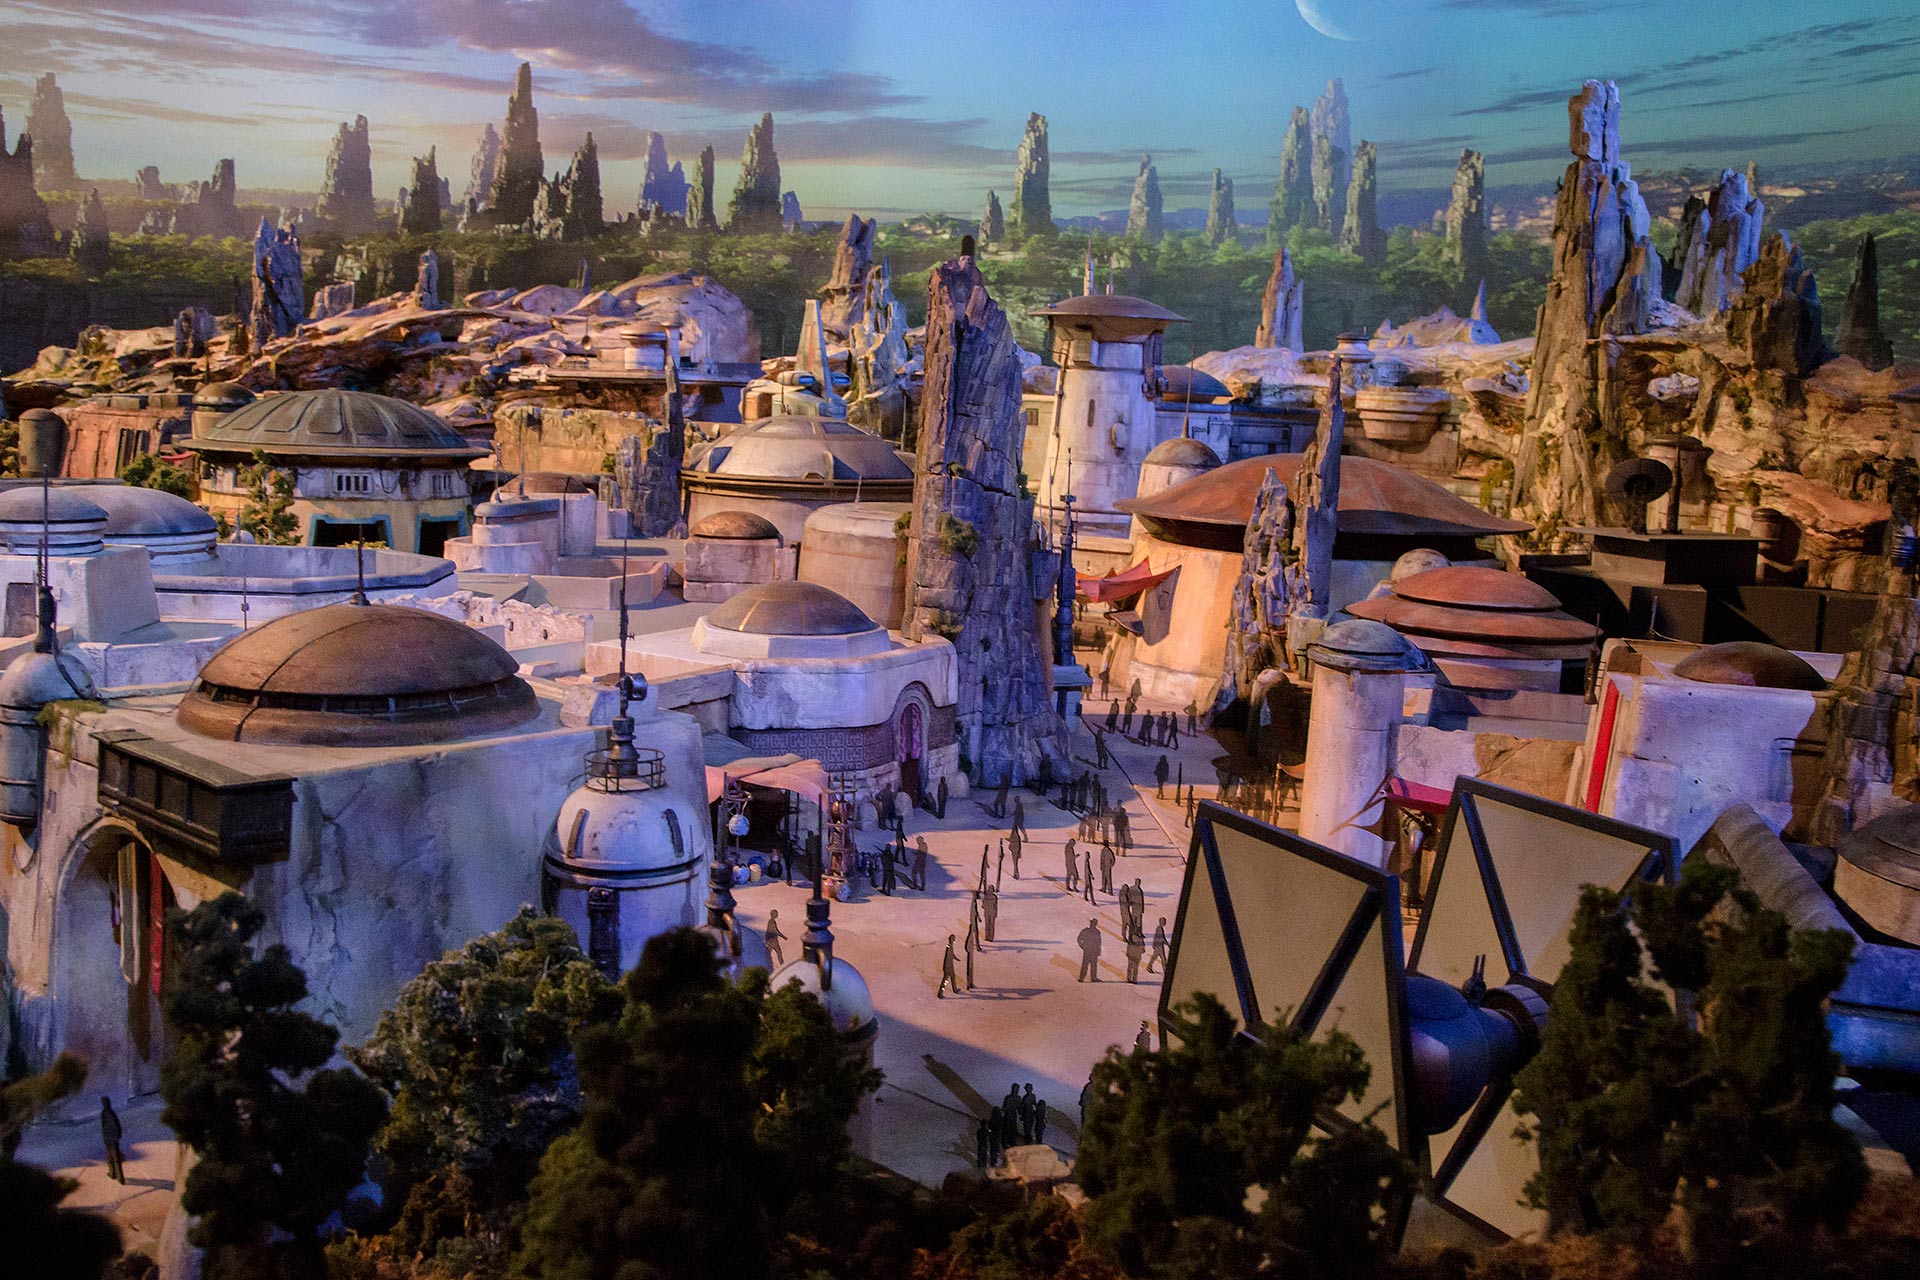 A model of the upcoming Star Wars Land.